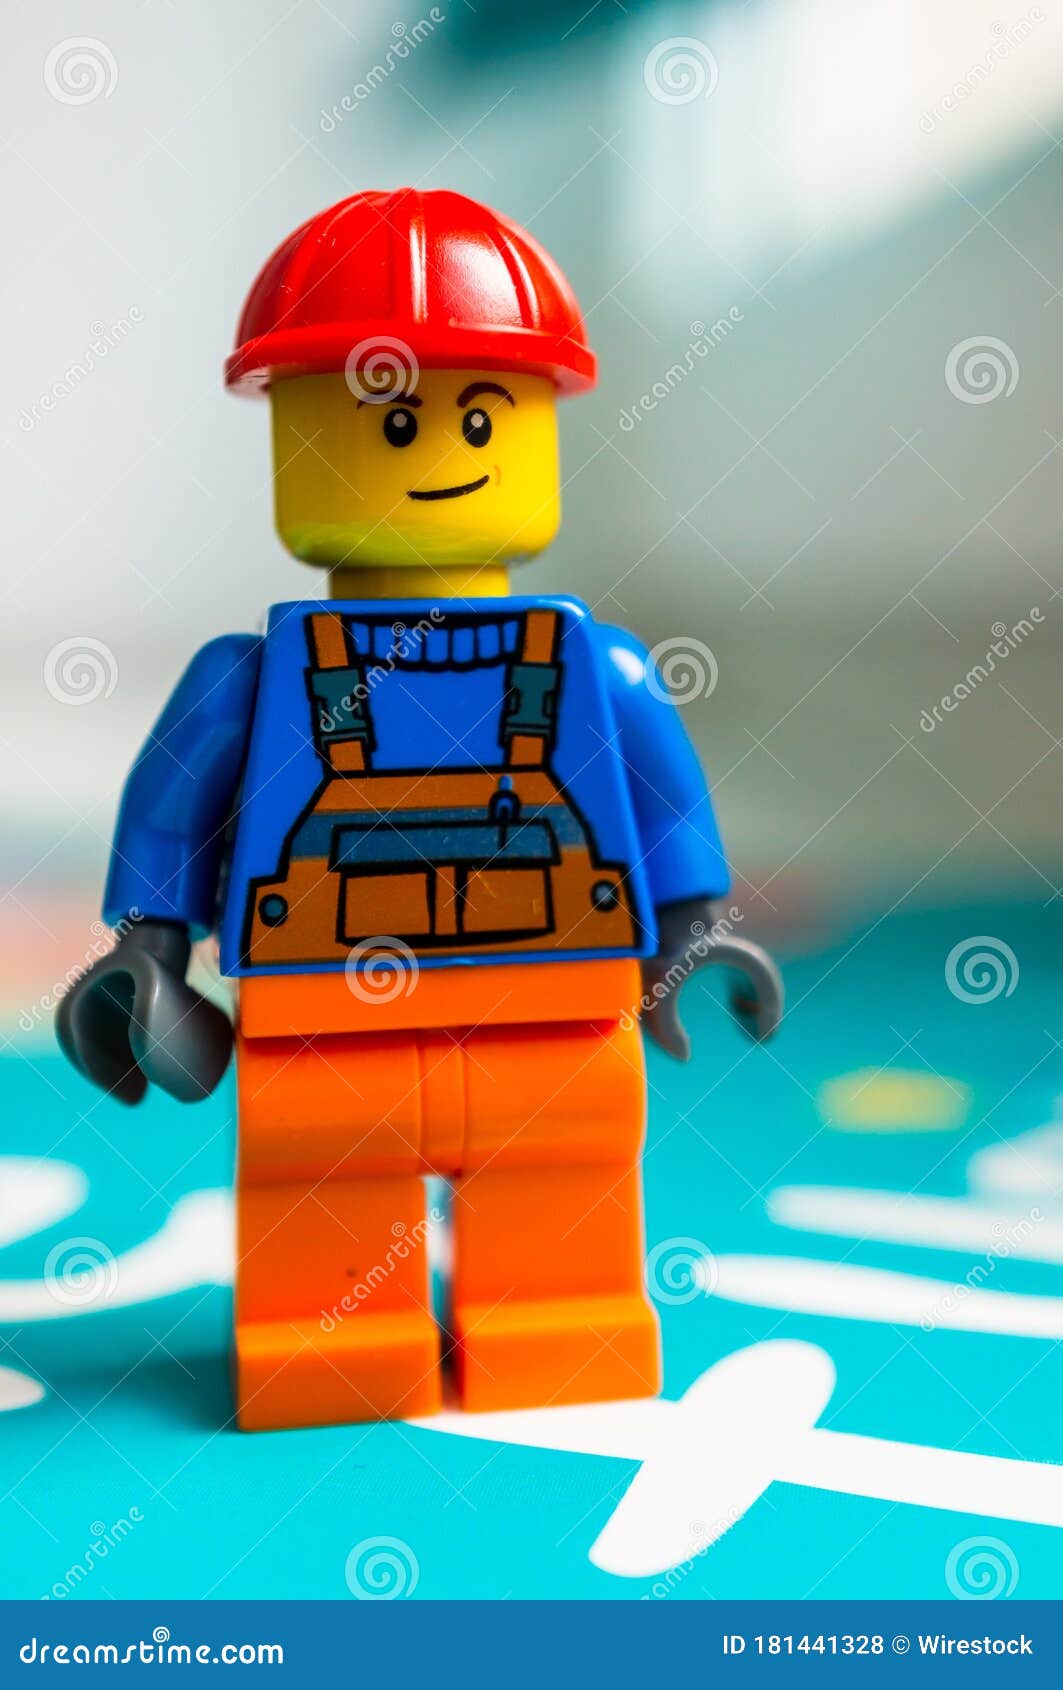 Lego Construction Worker Figurine. Editorial Stock - Image of service, soft: 181441328